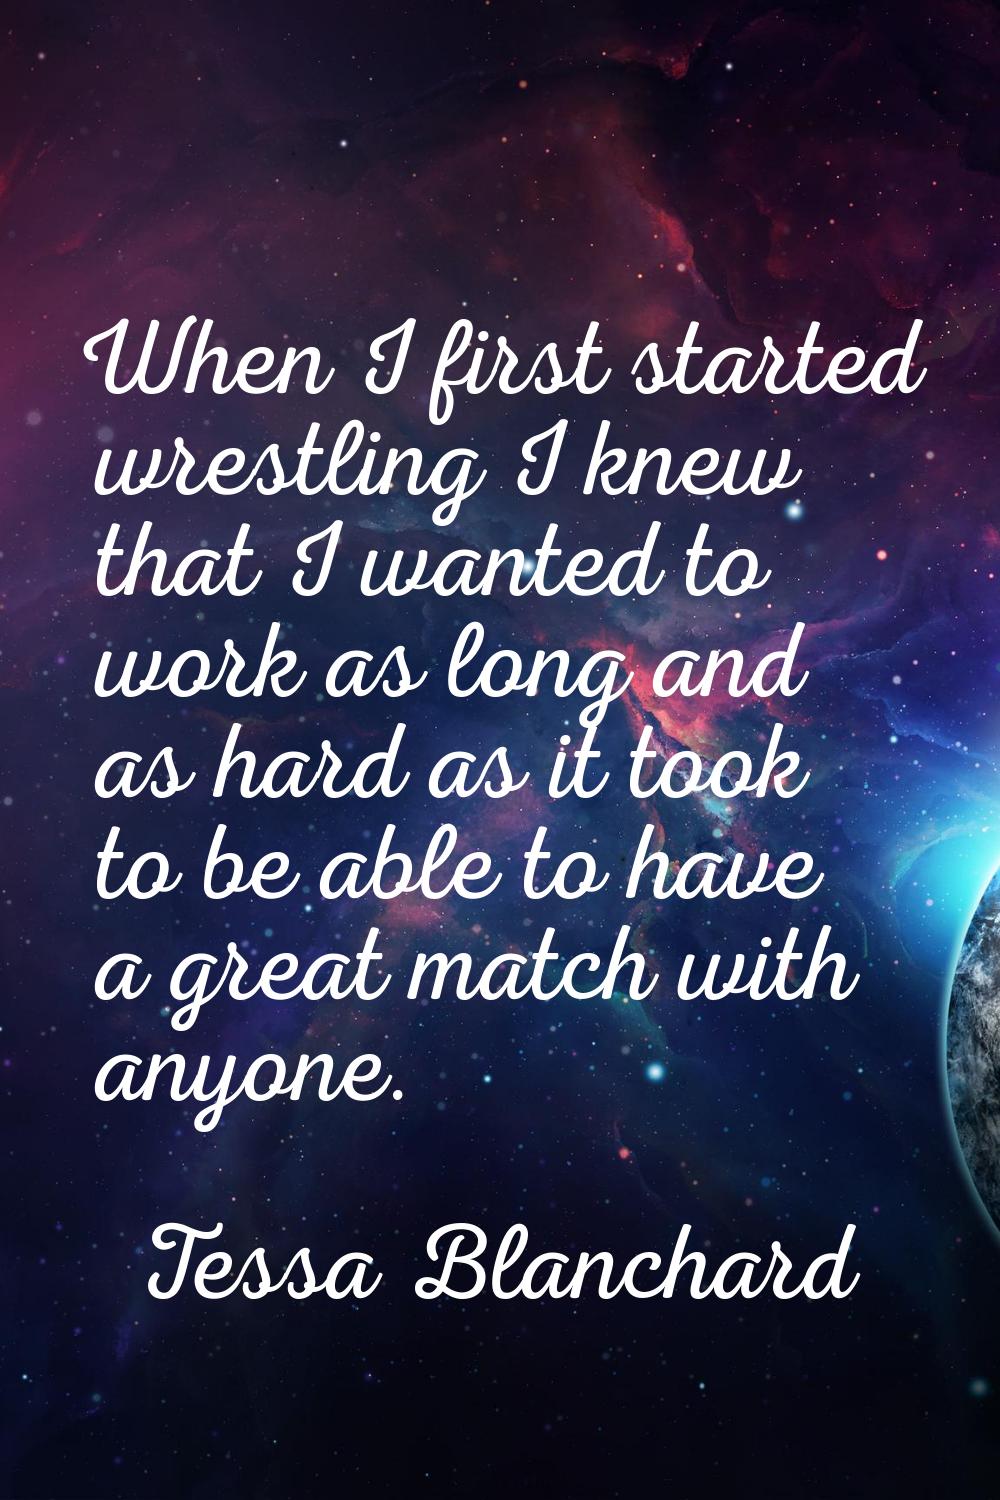 When I first started wrestling I knew that I wanted to work as long and as hard as it took to be ab